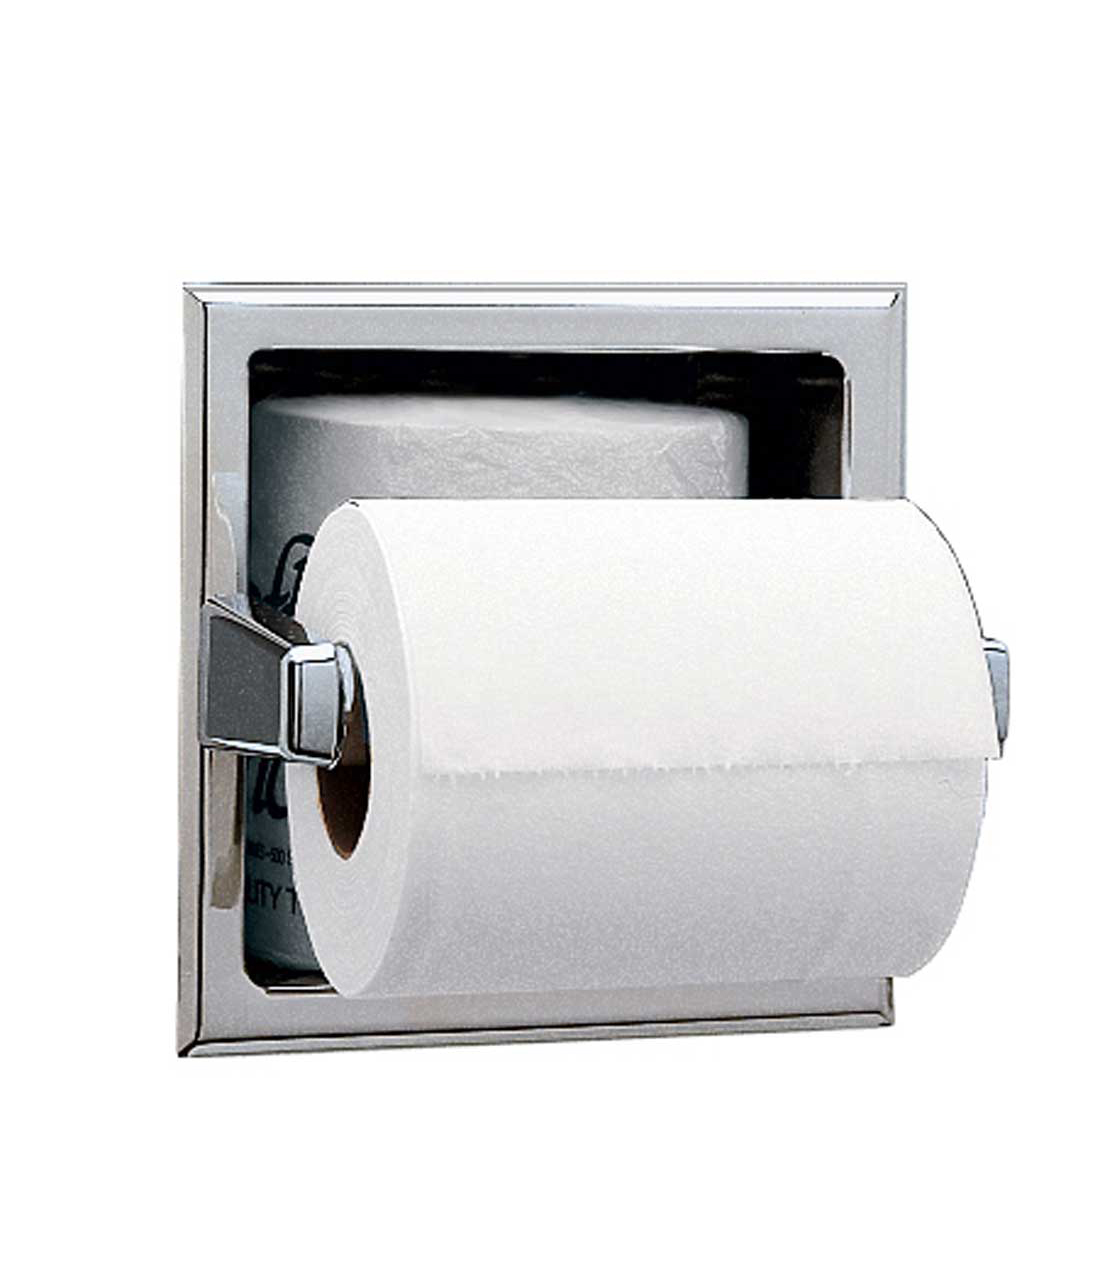 Black Recessed Toilet/Tissue Paper Holder Wall Mounted Rack Storage All Metal 